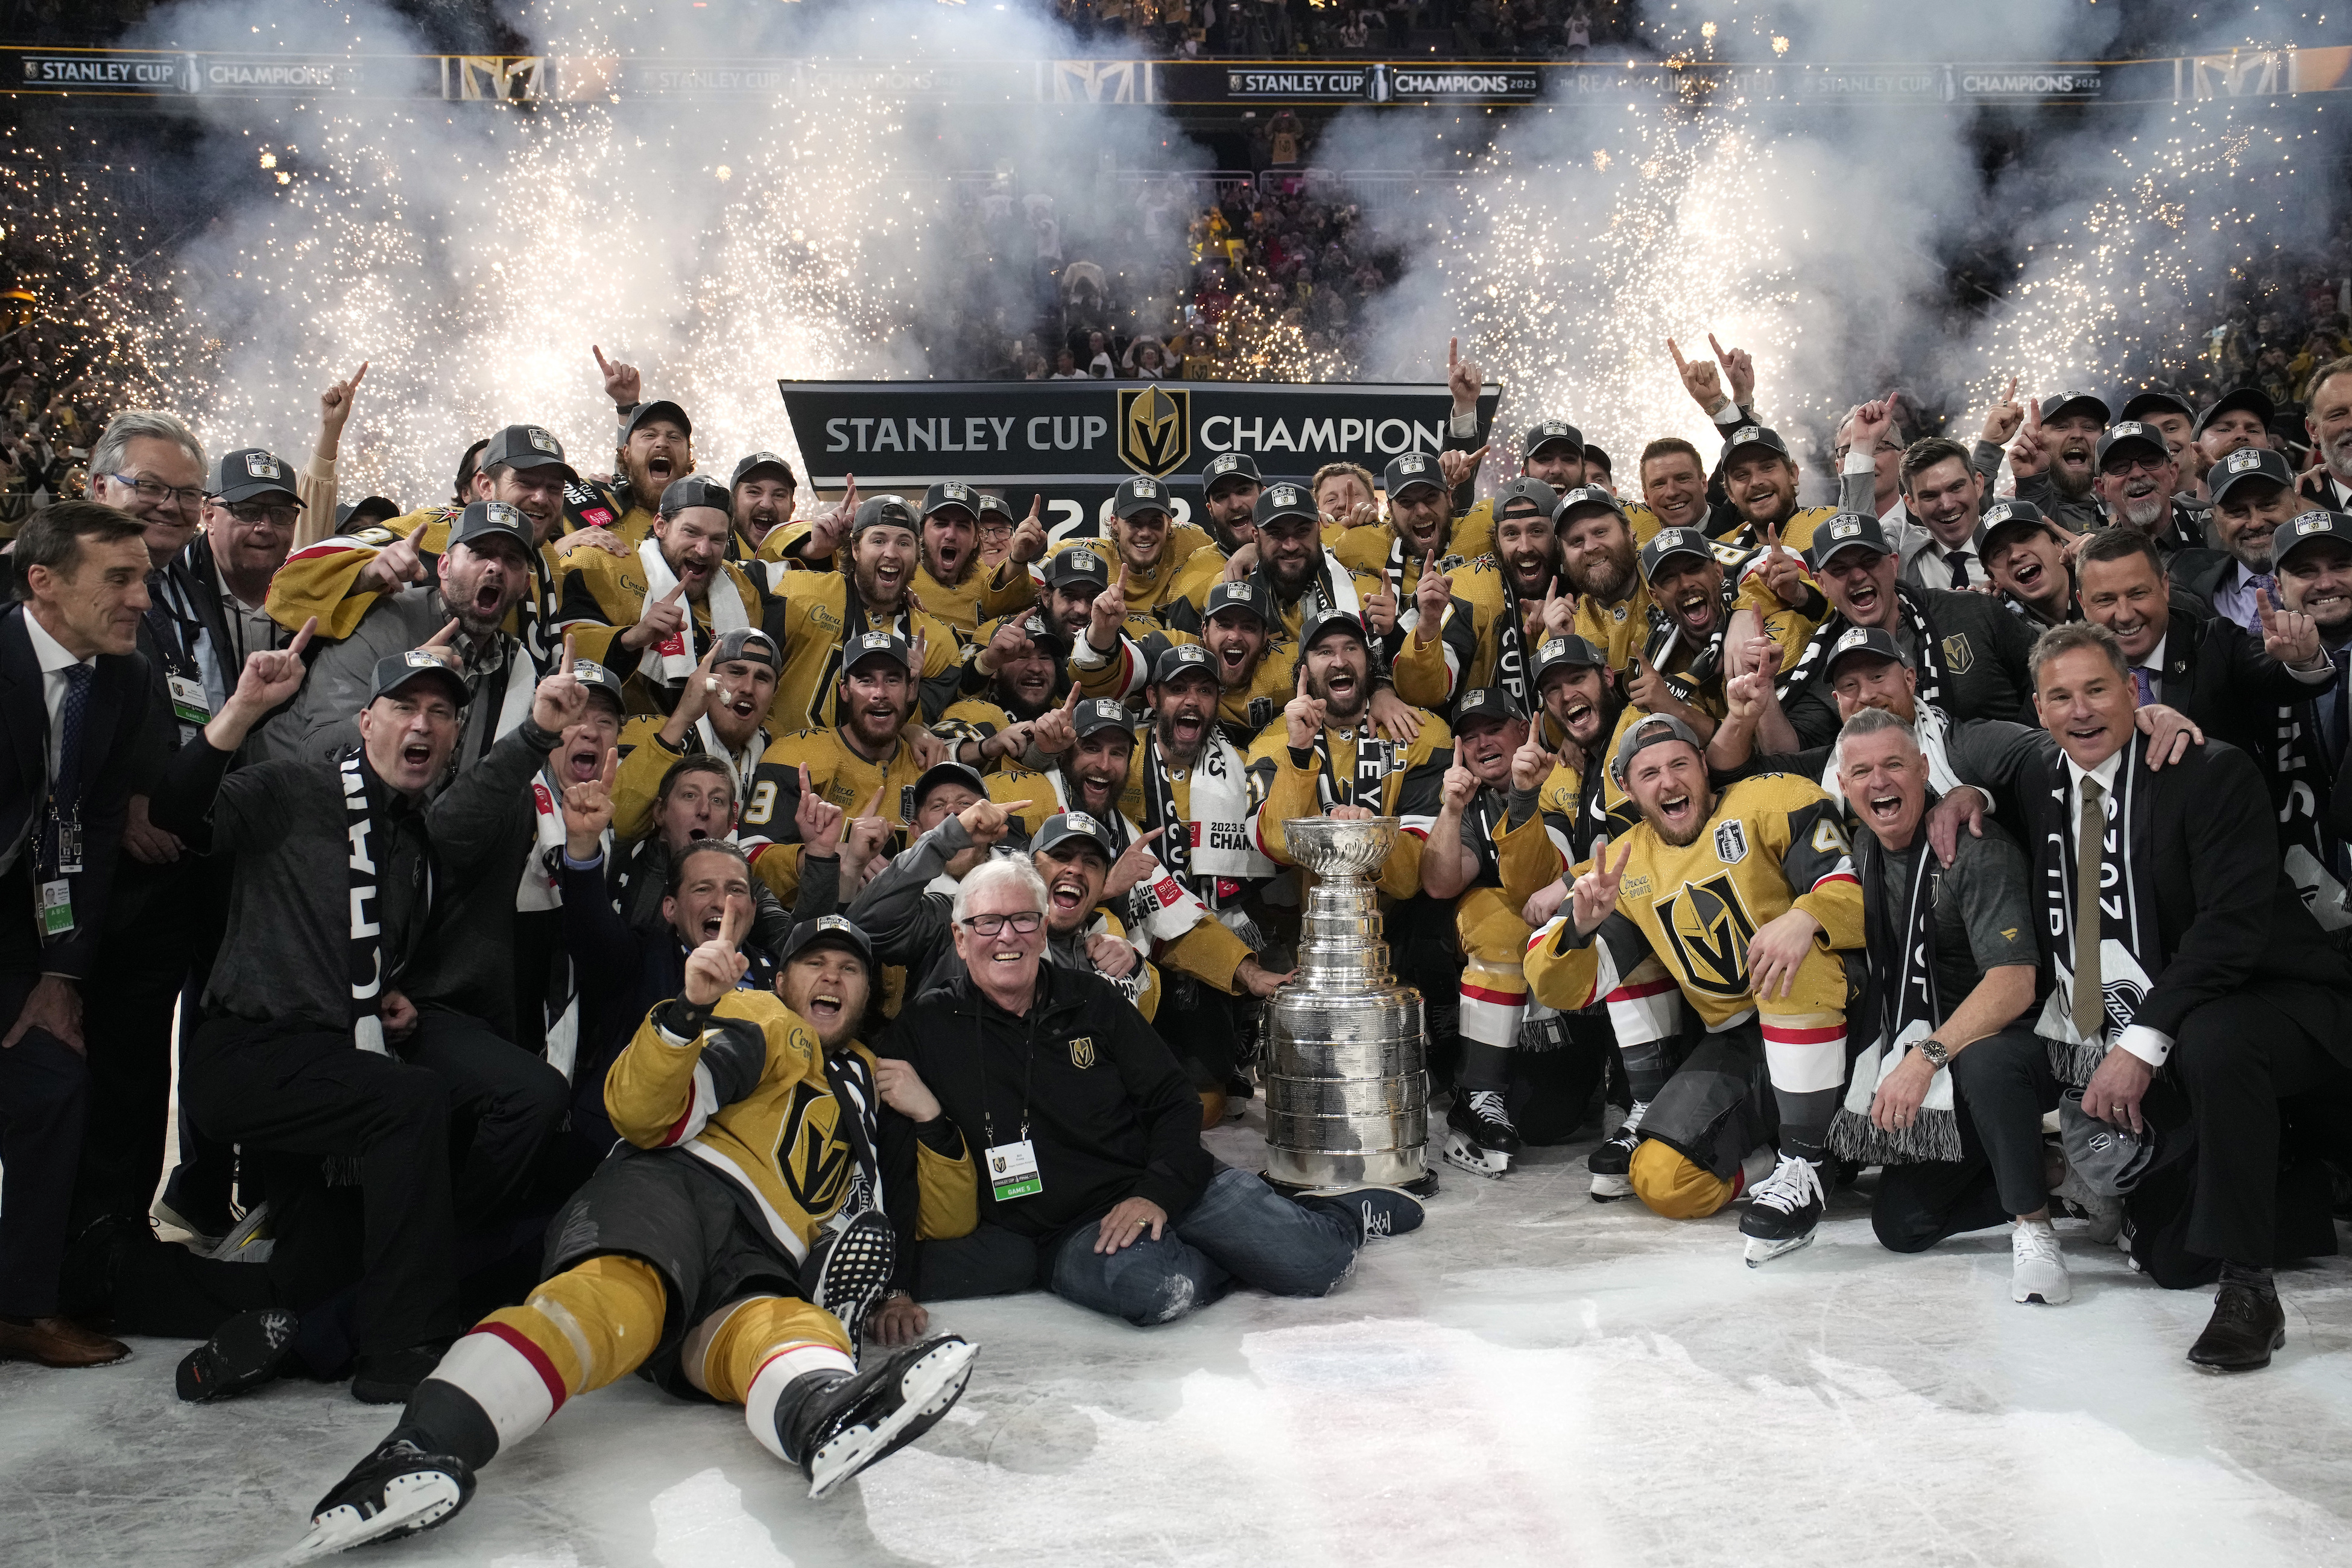 https://img.theepochtimes.com/assets/uploads/2023/06/14/id5332089-Stanley_Cup_Panthers_Golden_Knights6-13-23.jpg